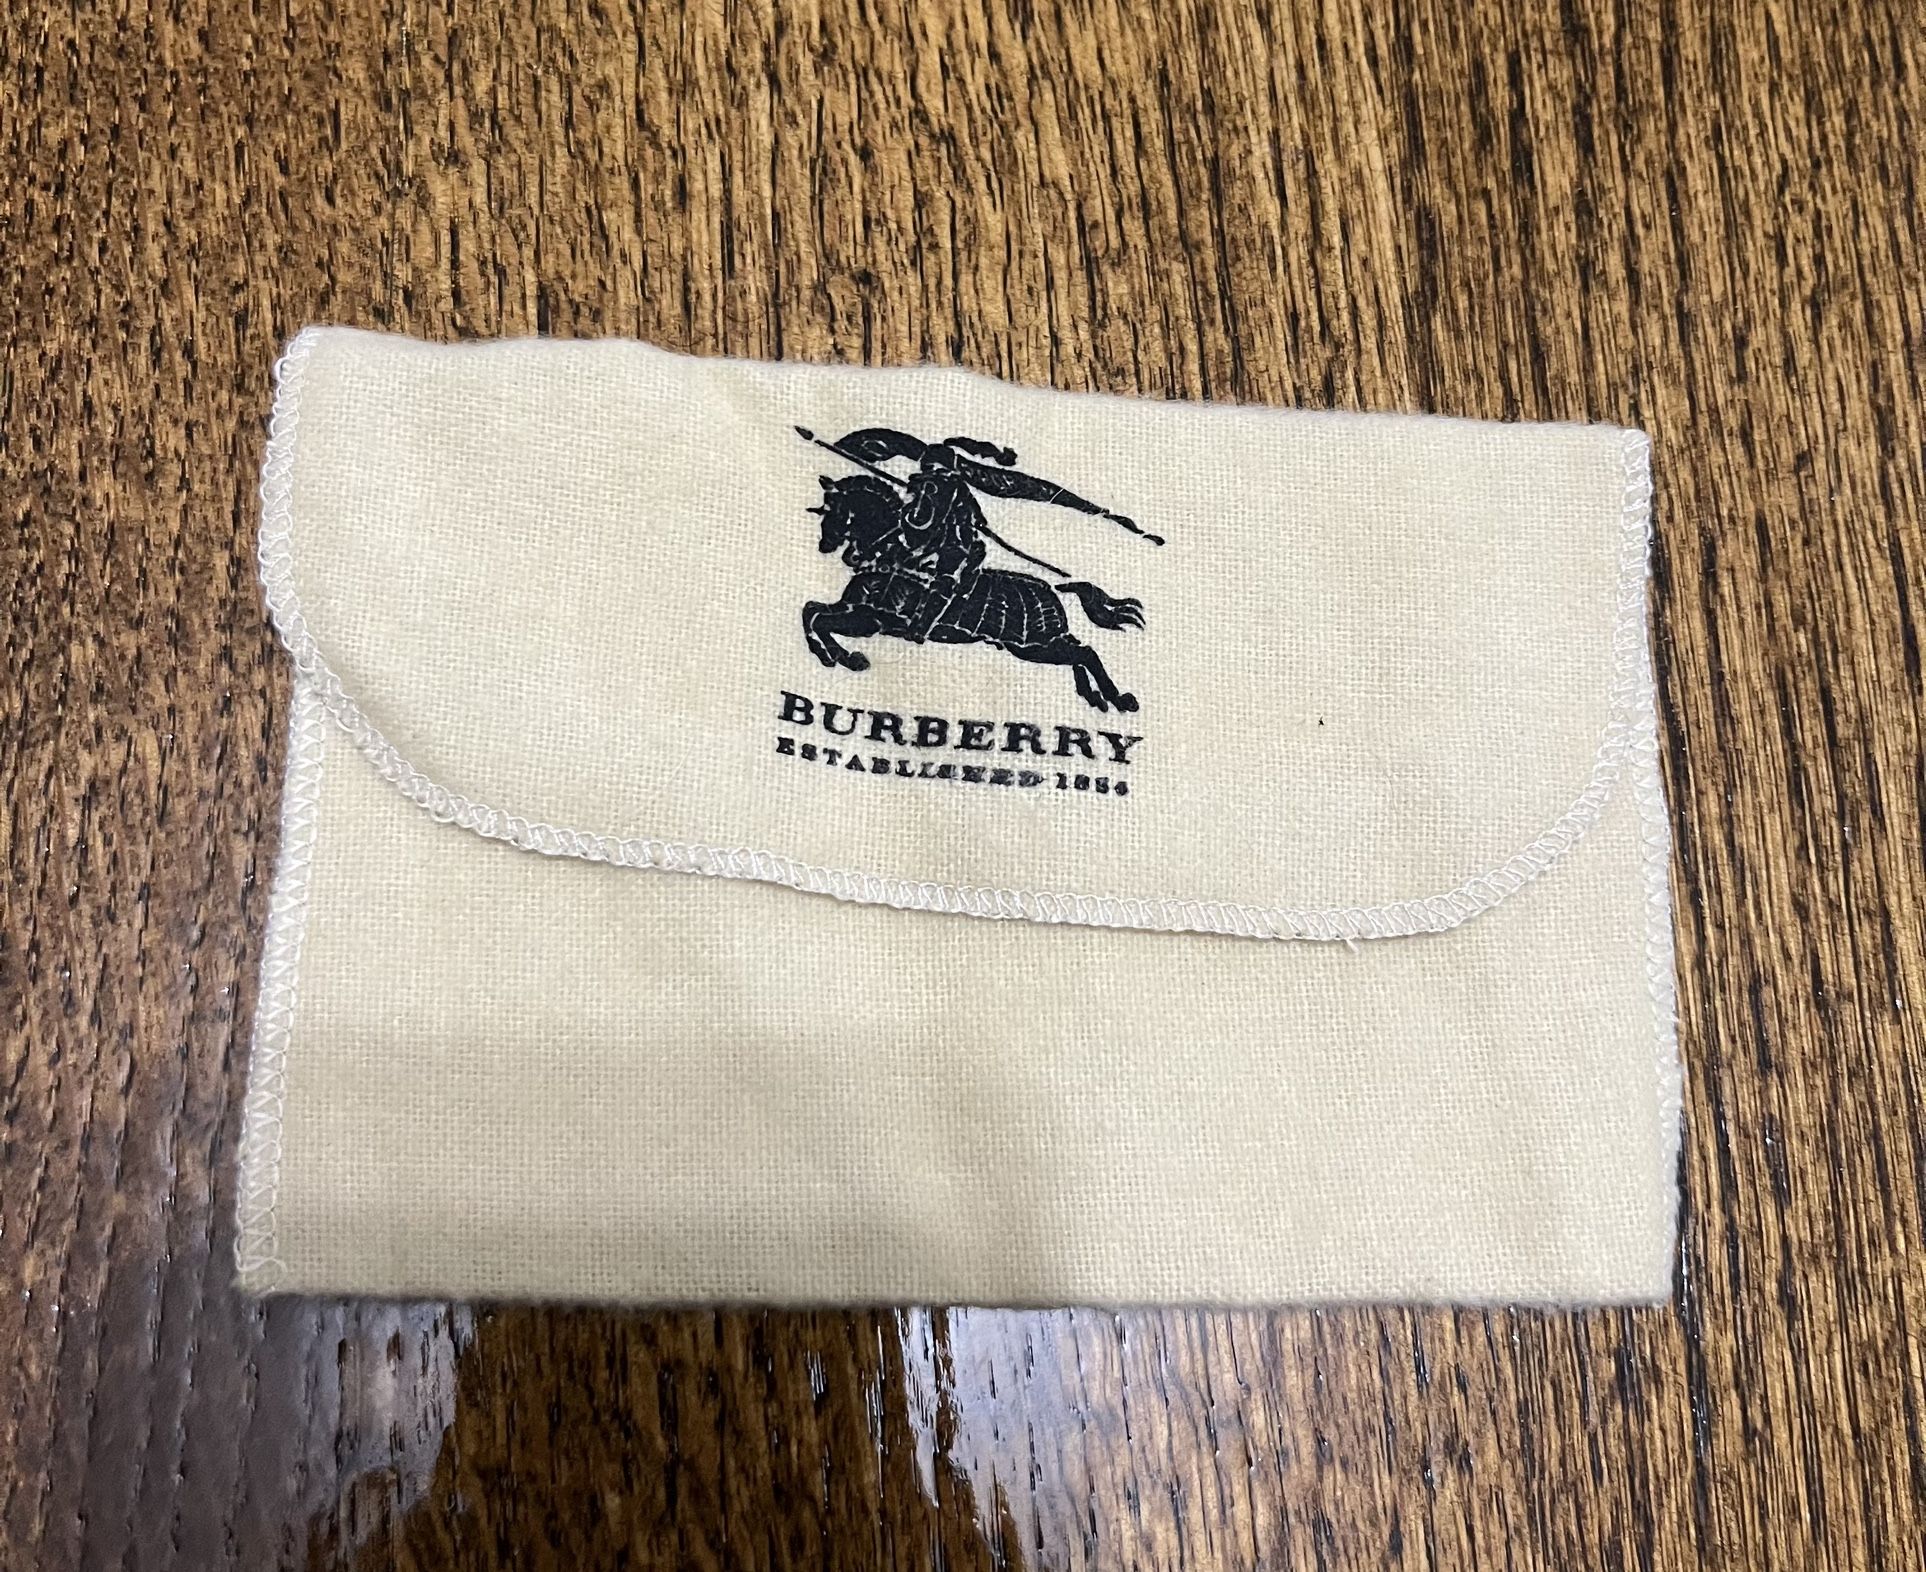 Burberrry Small Wallet Dust Bag 